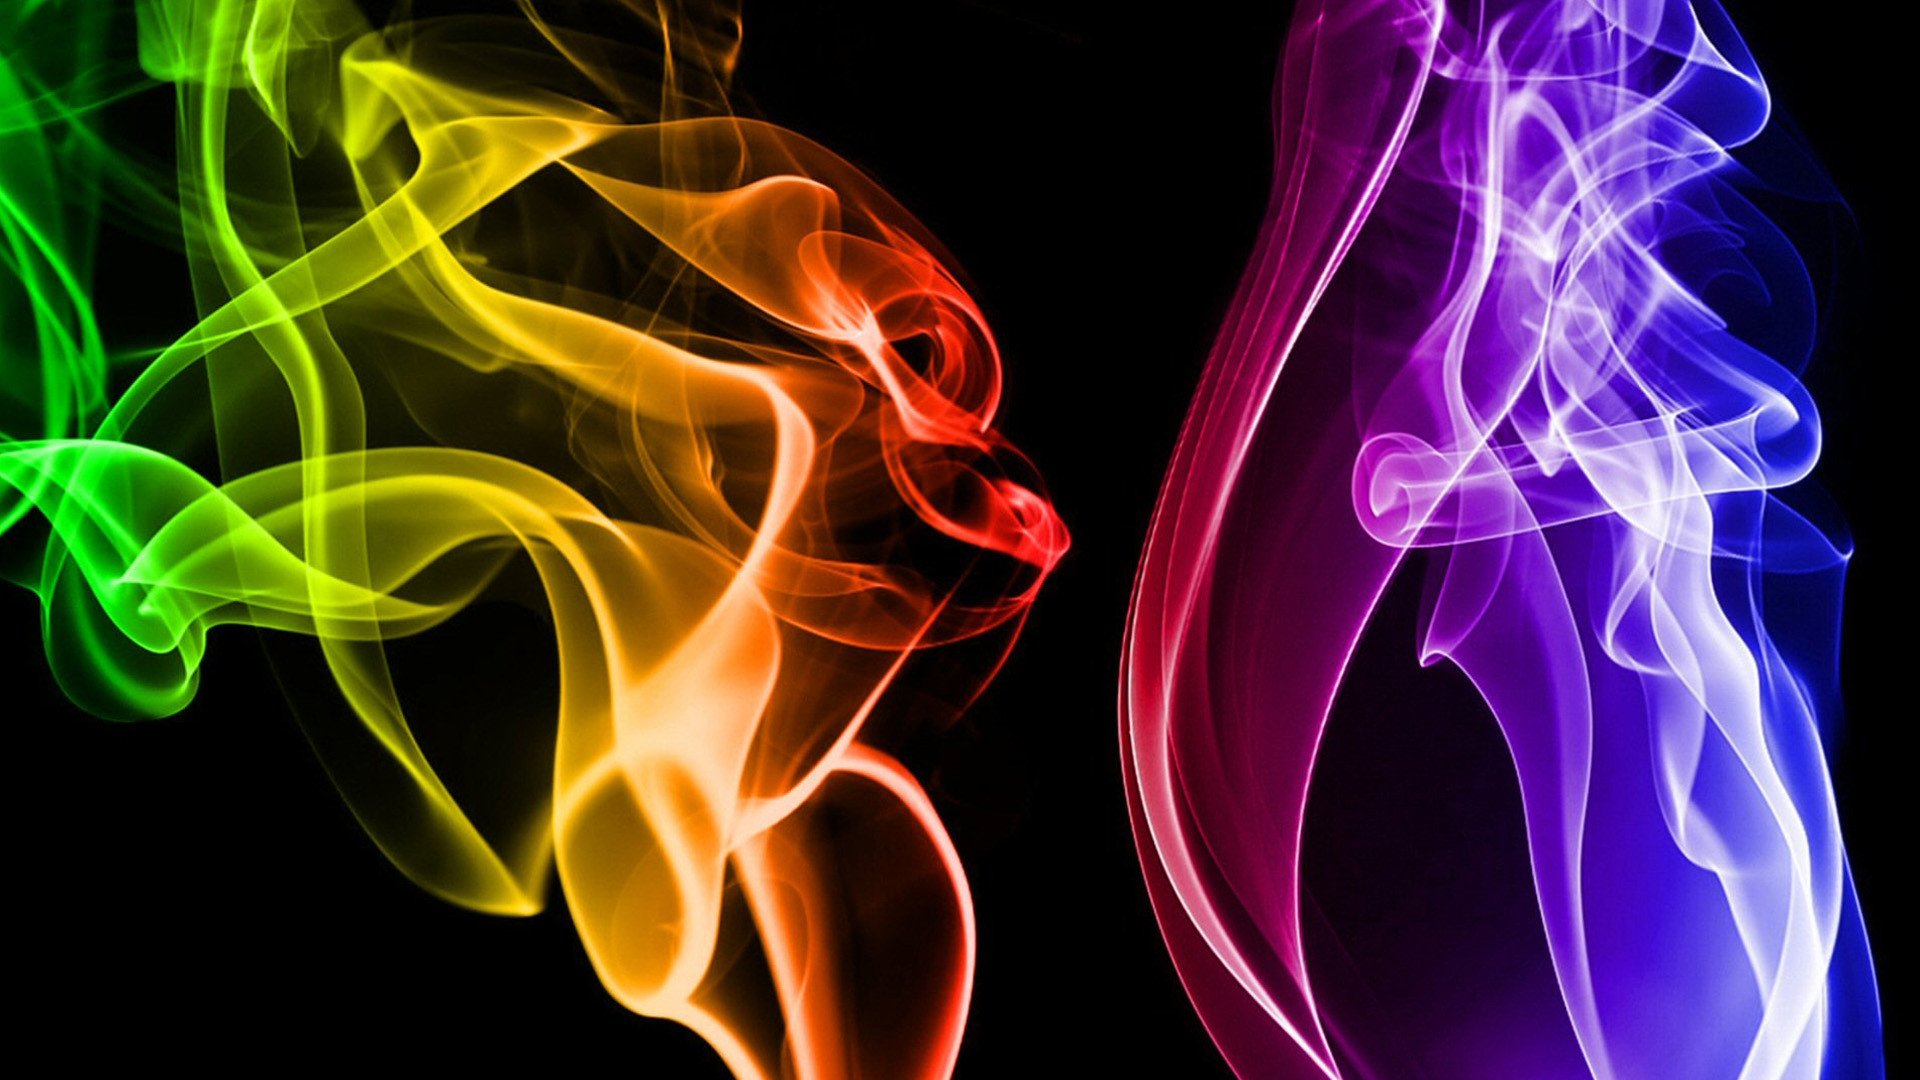 Download - Colorful Weed Smoke Backgrounds , HD Wallpaper & Backgrounds